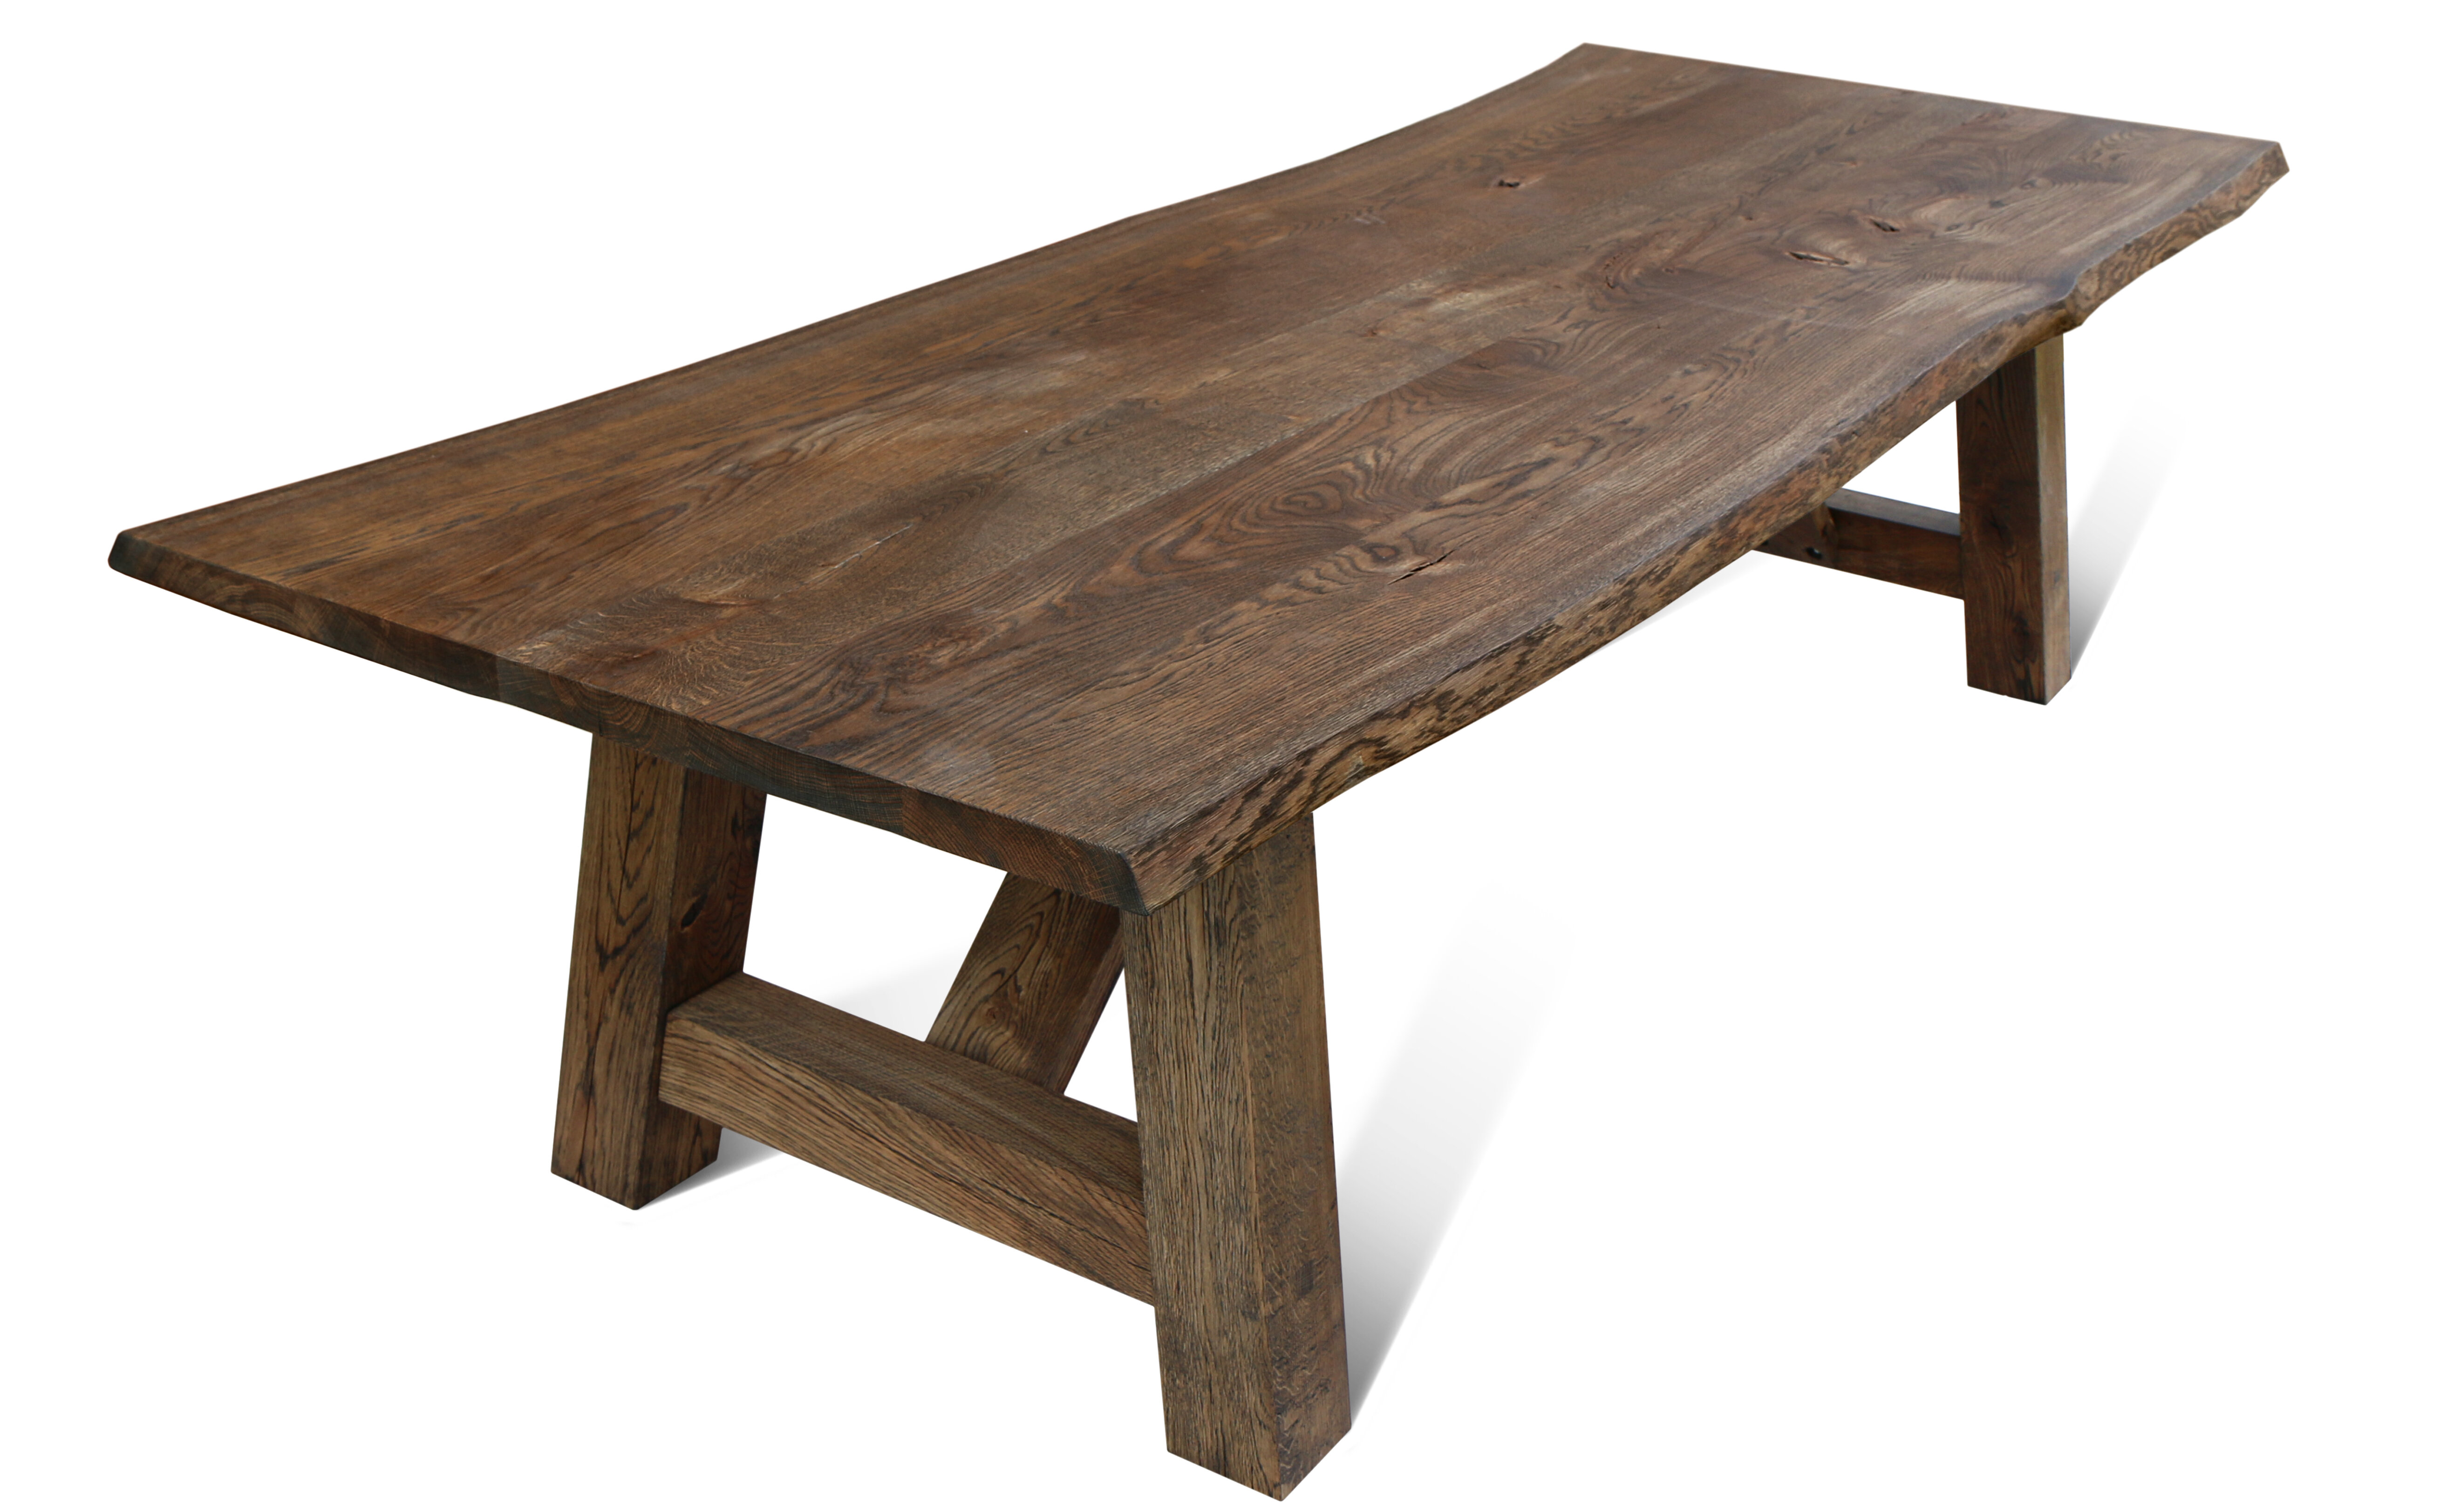 Maximahouse 39 Solid Oak Trestle Dining Table Wayfair